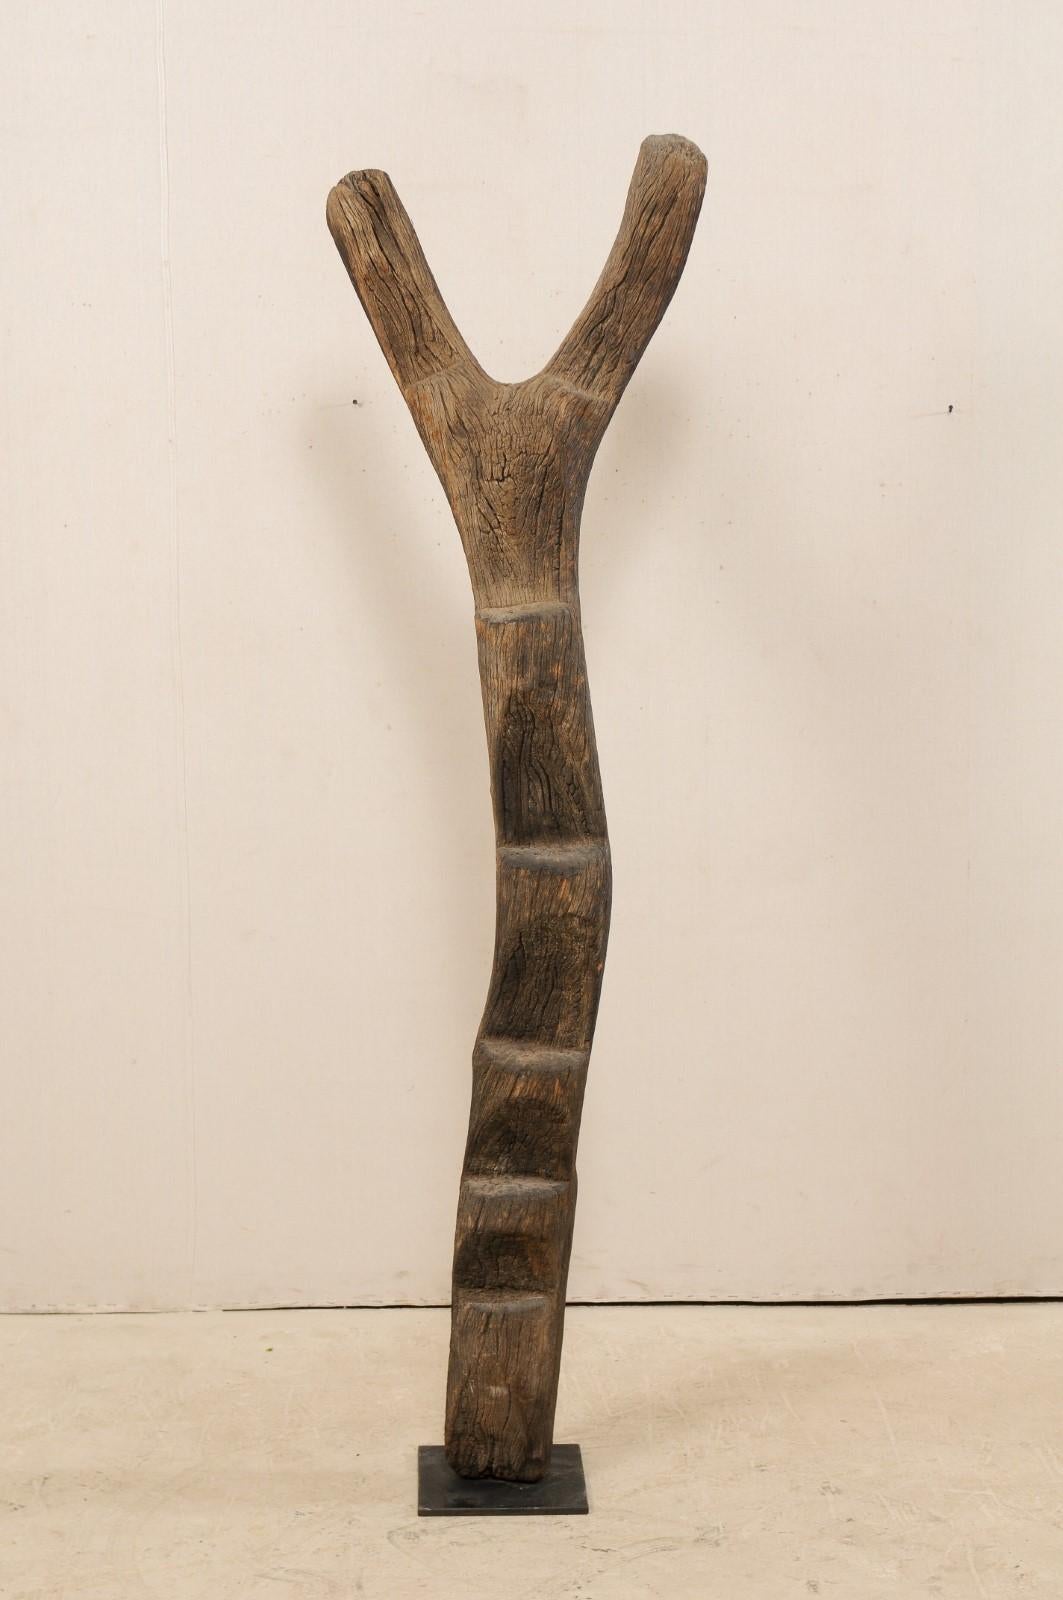 An early to mid-20th century Dogon tribe wooden ladder, on custom metal stand. This wooden ladder, which has been hand-carved from a single piece of wood, was used by the Dogon tribes people of the Bandiagara Escarpment region of Mali, was used to